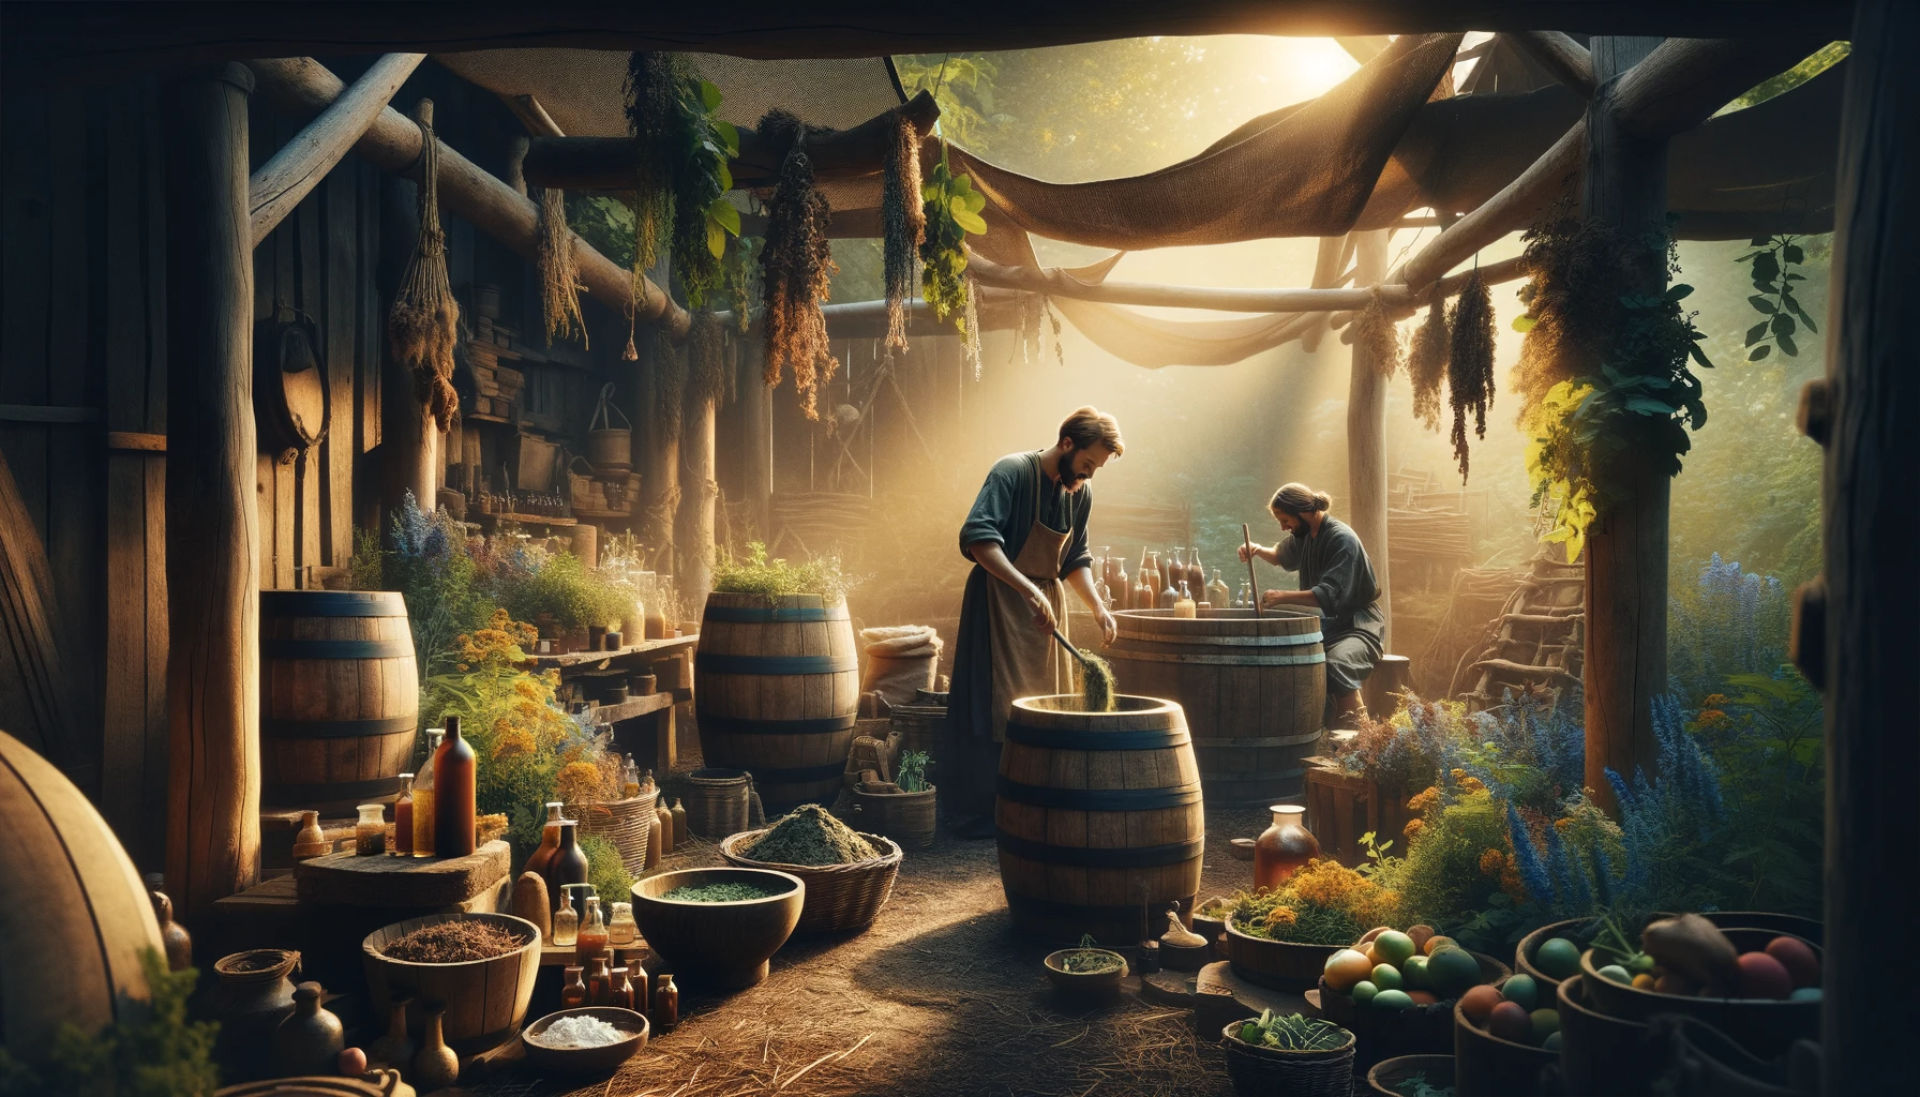 Preparation of Biodynamic Preparations: The second image portrays the preparation of biodynamic preparations. It features gardeners mixing herbal preparations in a rustic setting, surrounded by natural elements. This scene highlights the traditional and mindful process of creating biodynamic preparations, integral to the gardening practice.